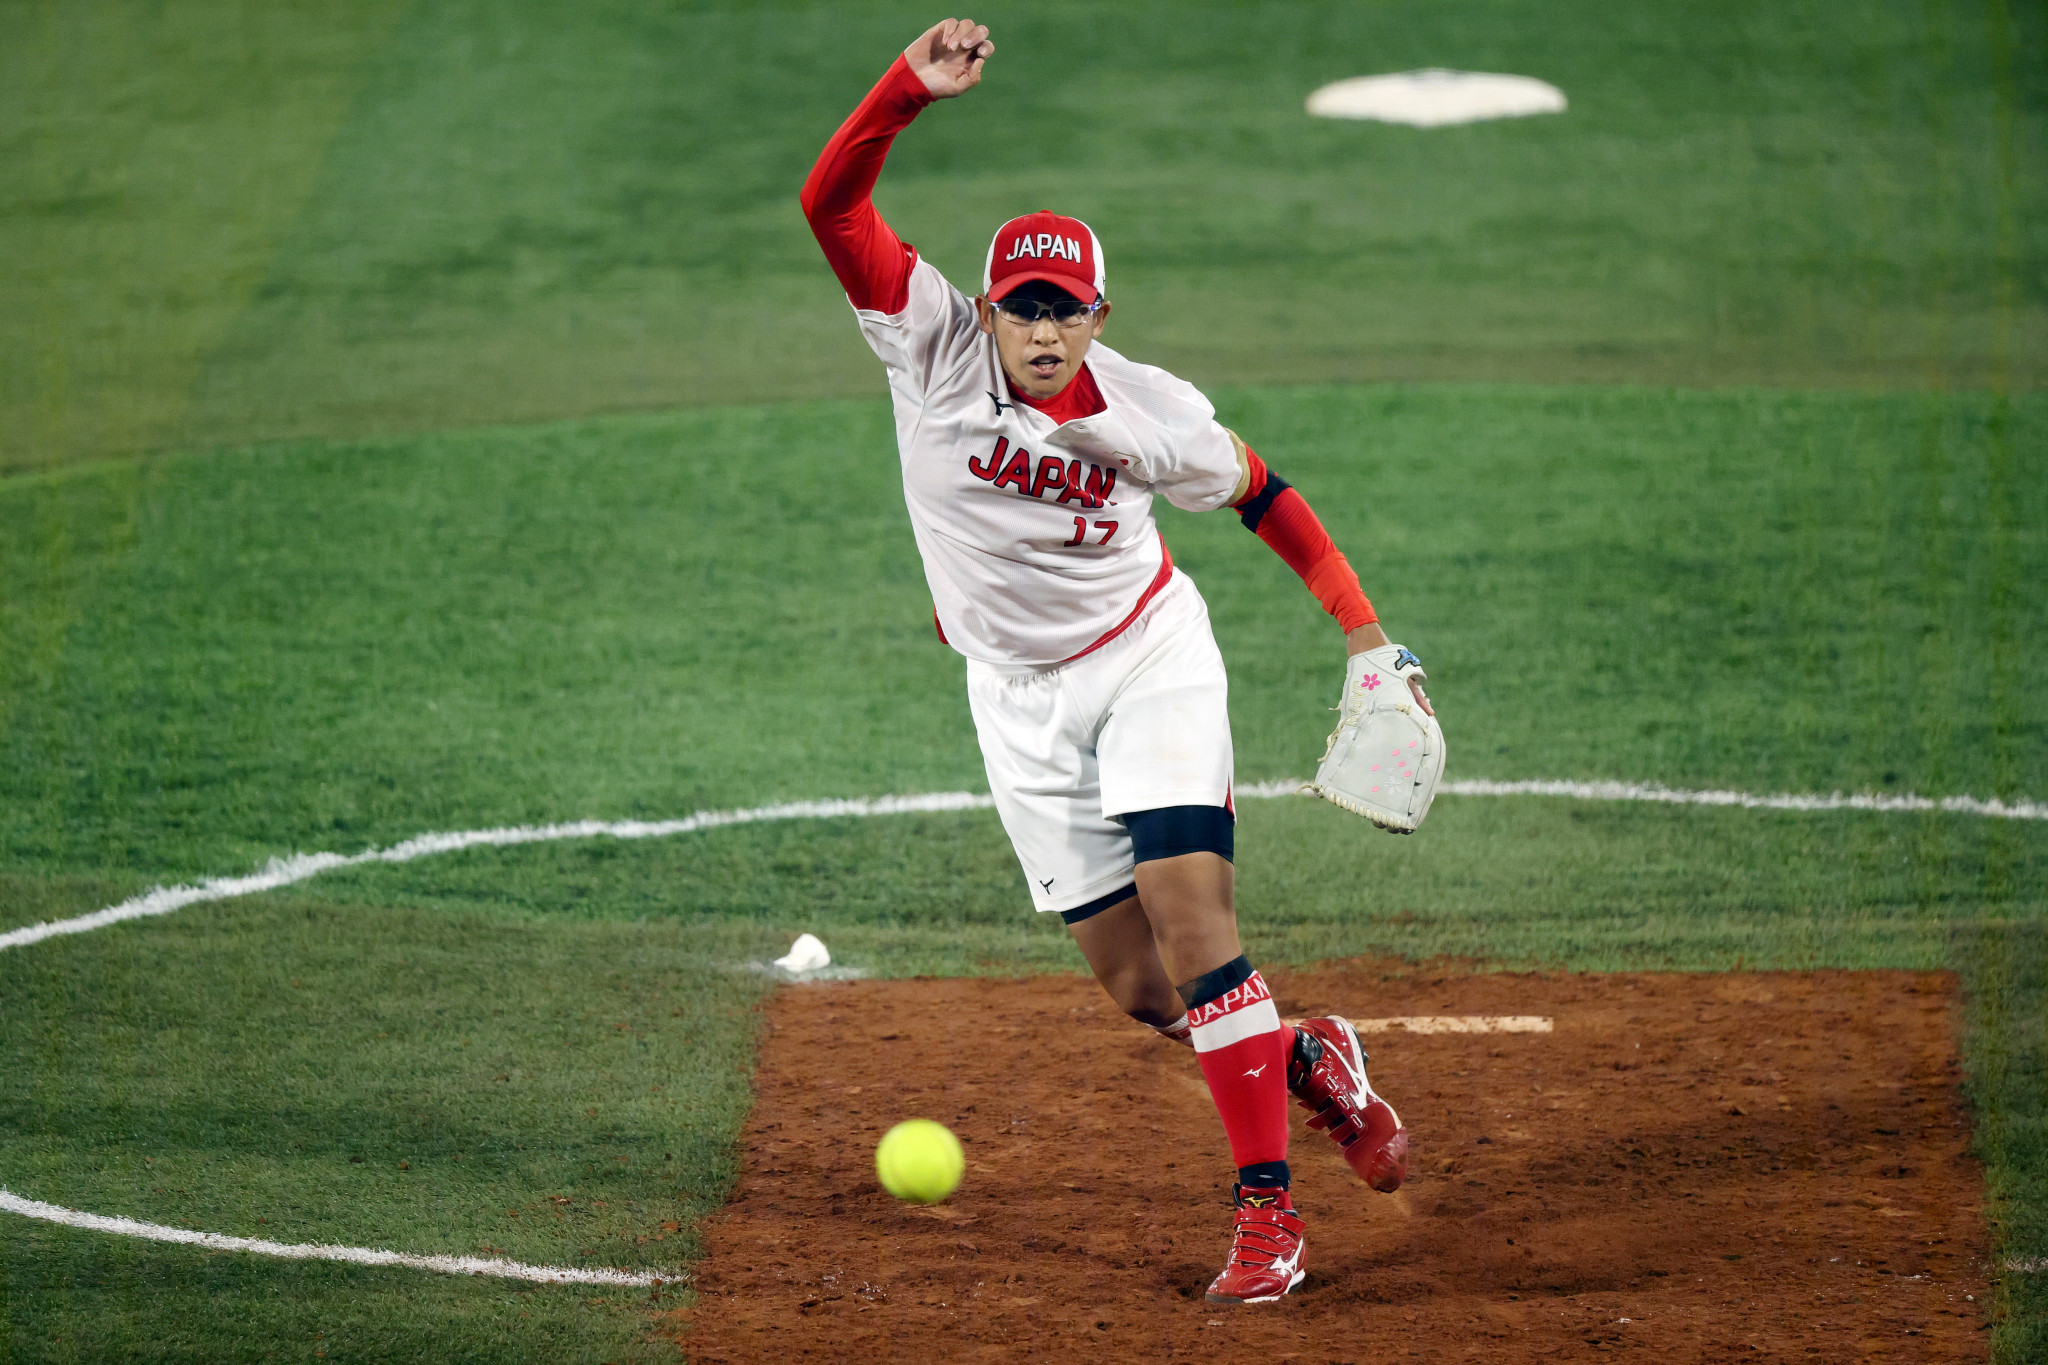 Japan won the softball tournament at Tokyo 2020 and the nation's under-18 team are ranked number one in the world ©Getty Images